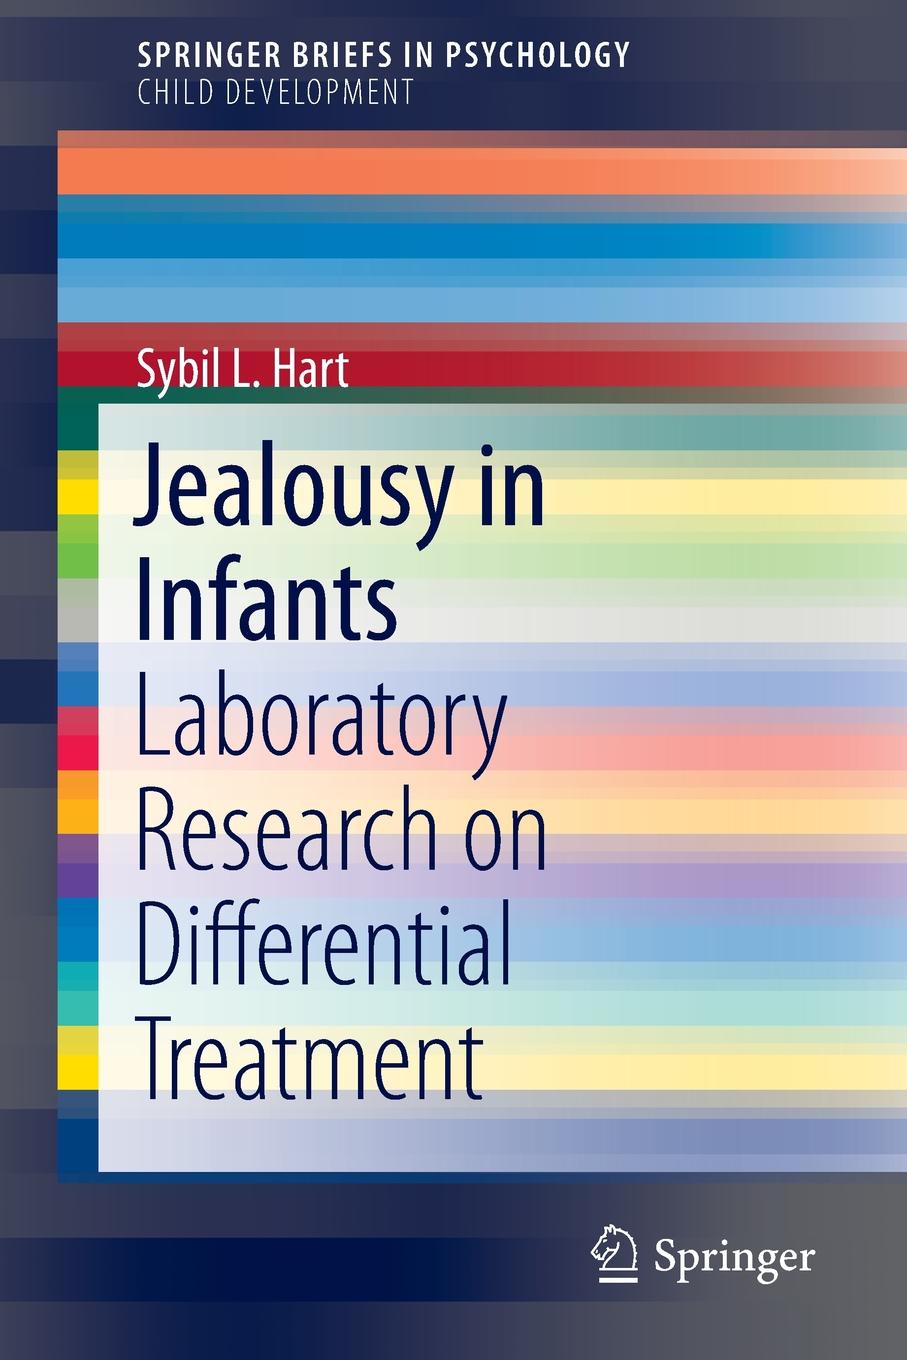 Jealousy in Infants. Laboratory Research on Differential Treatment